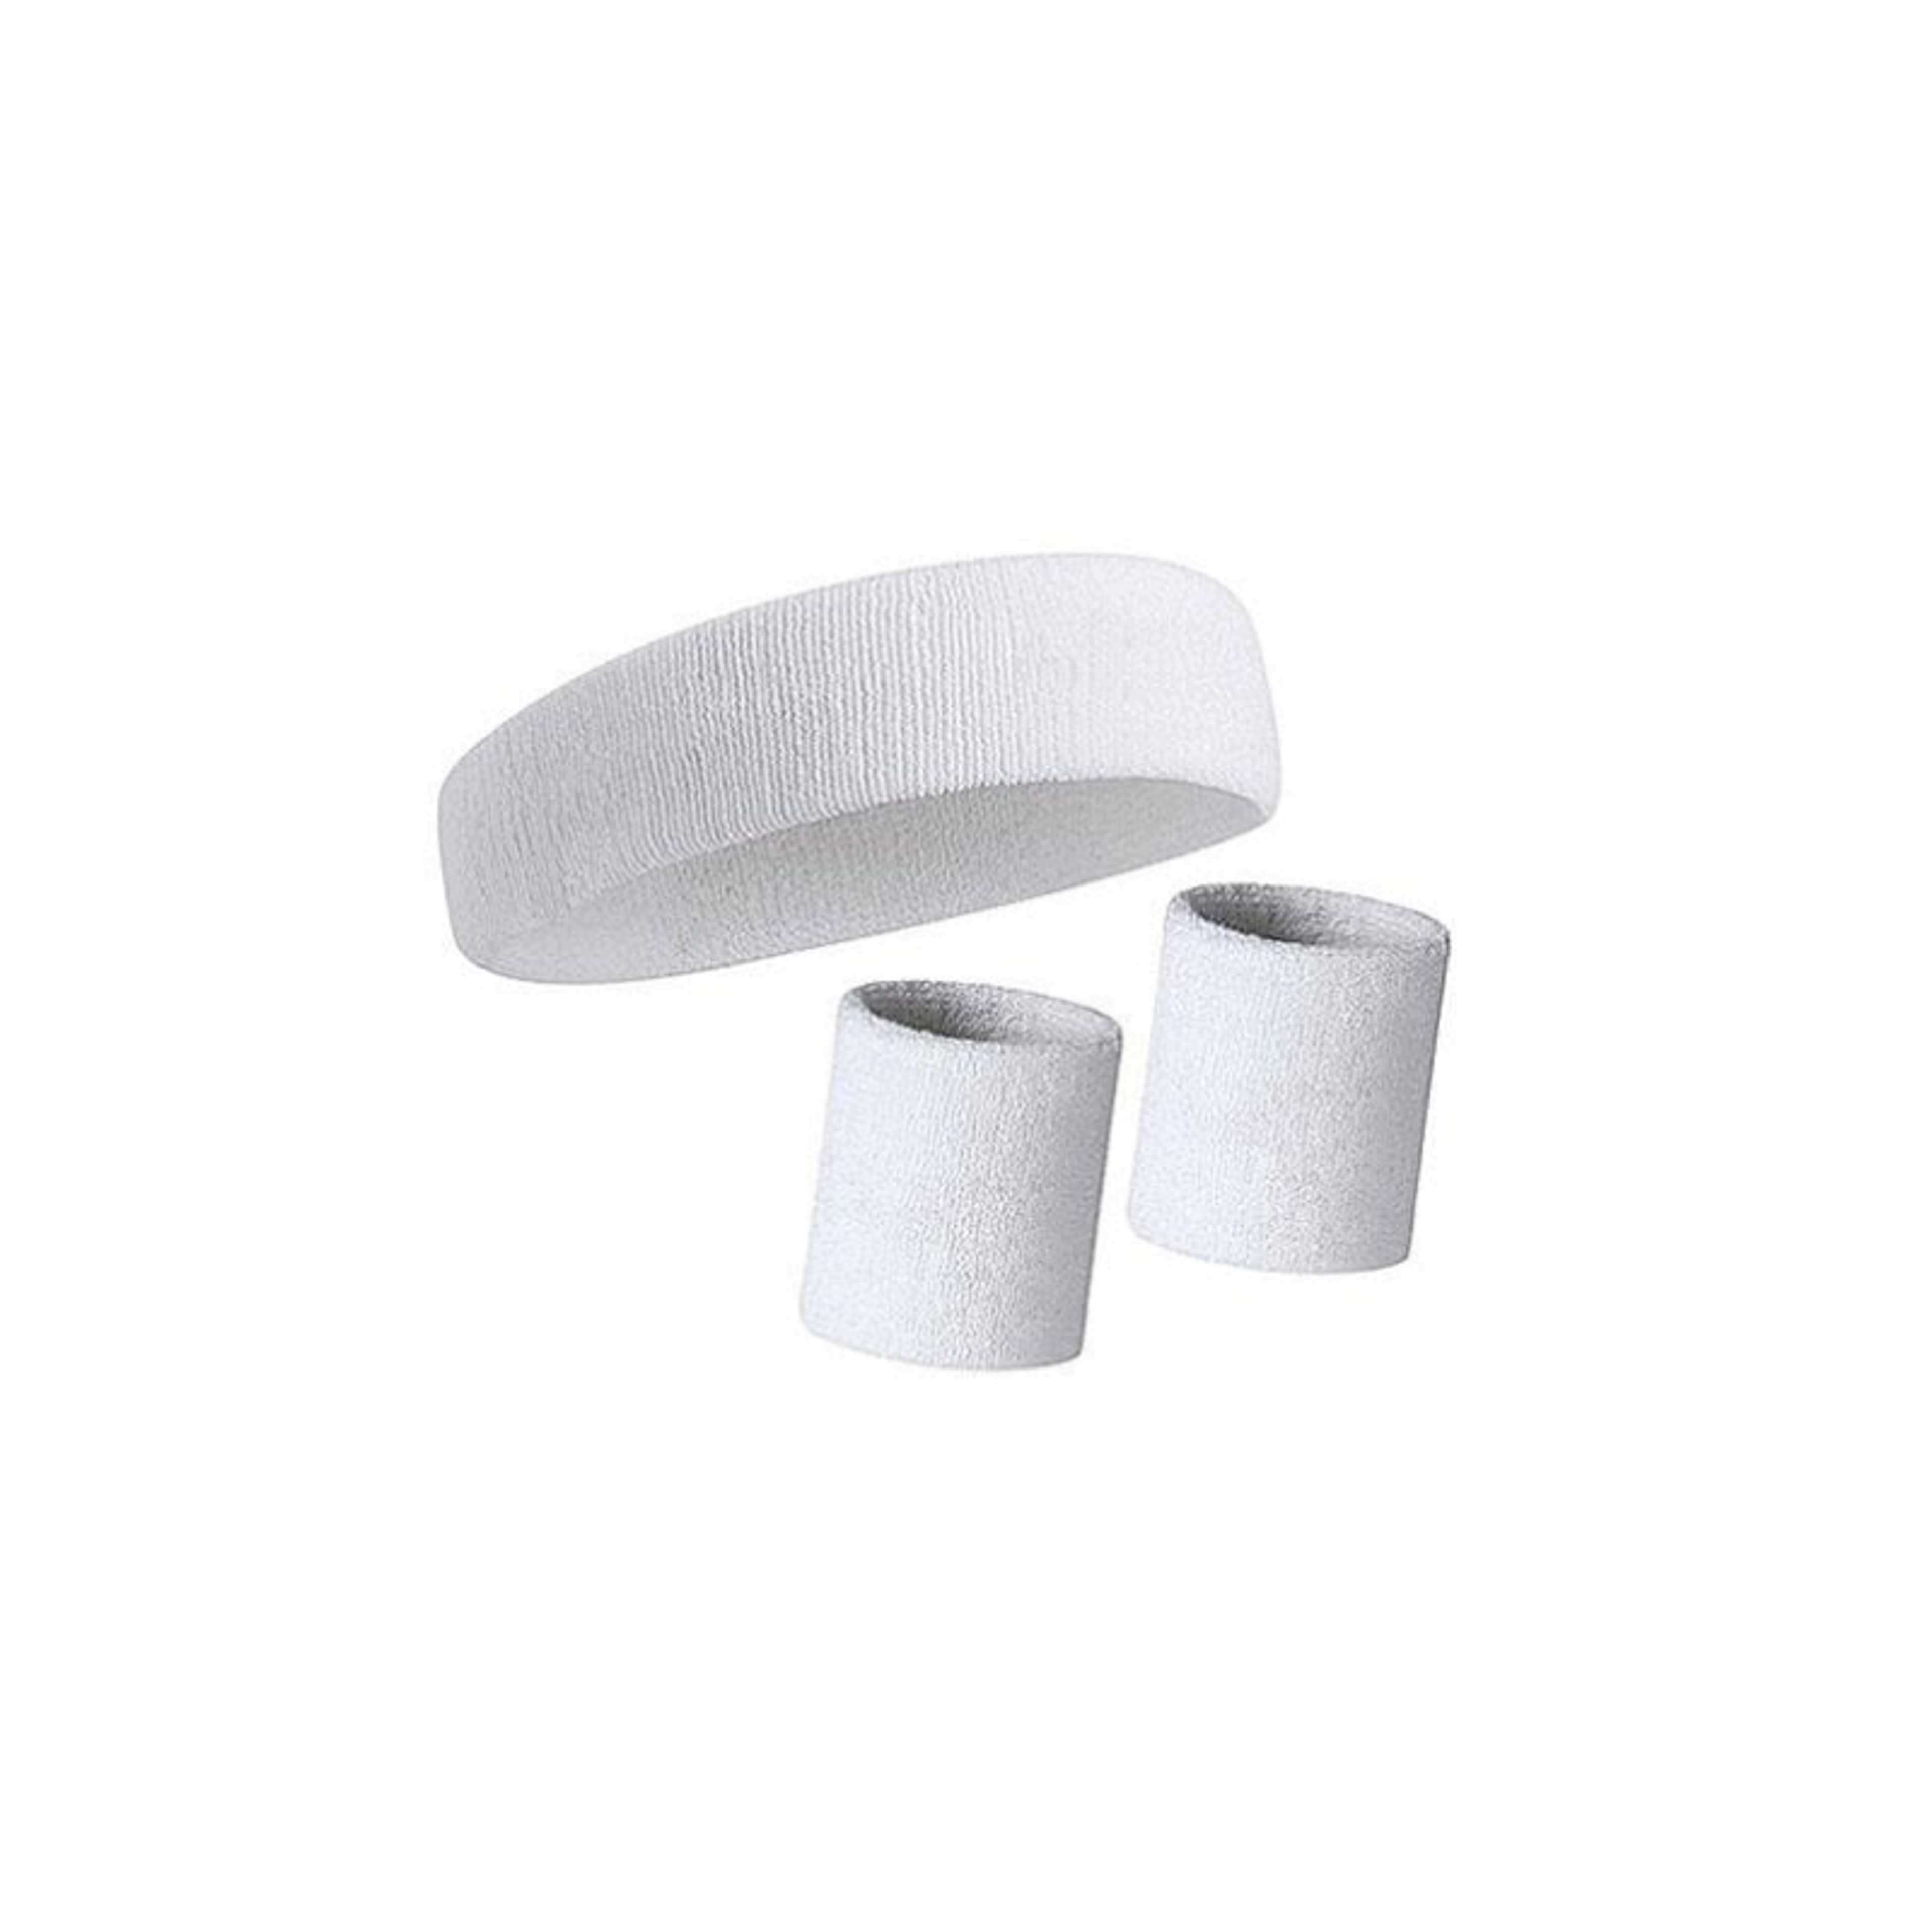 3 Pieces bands Set, Includes Sports Headband and Wrist bands for Athletic Men and Women - White